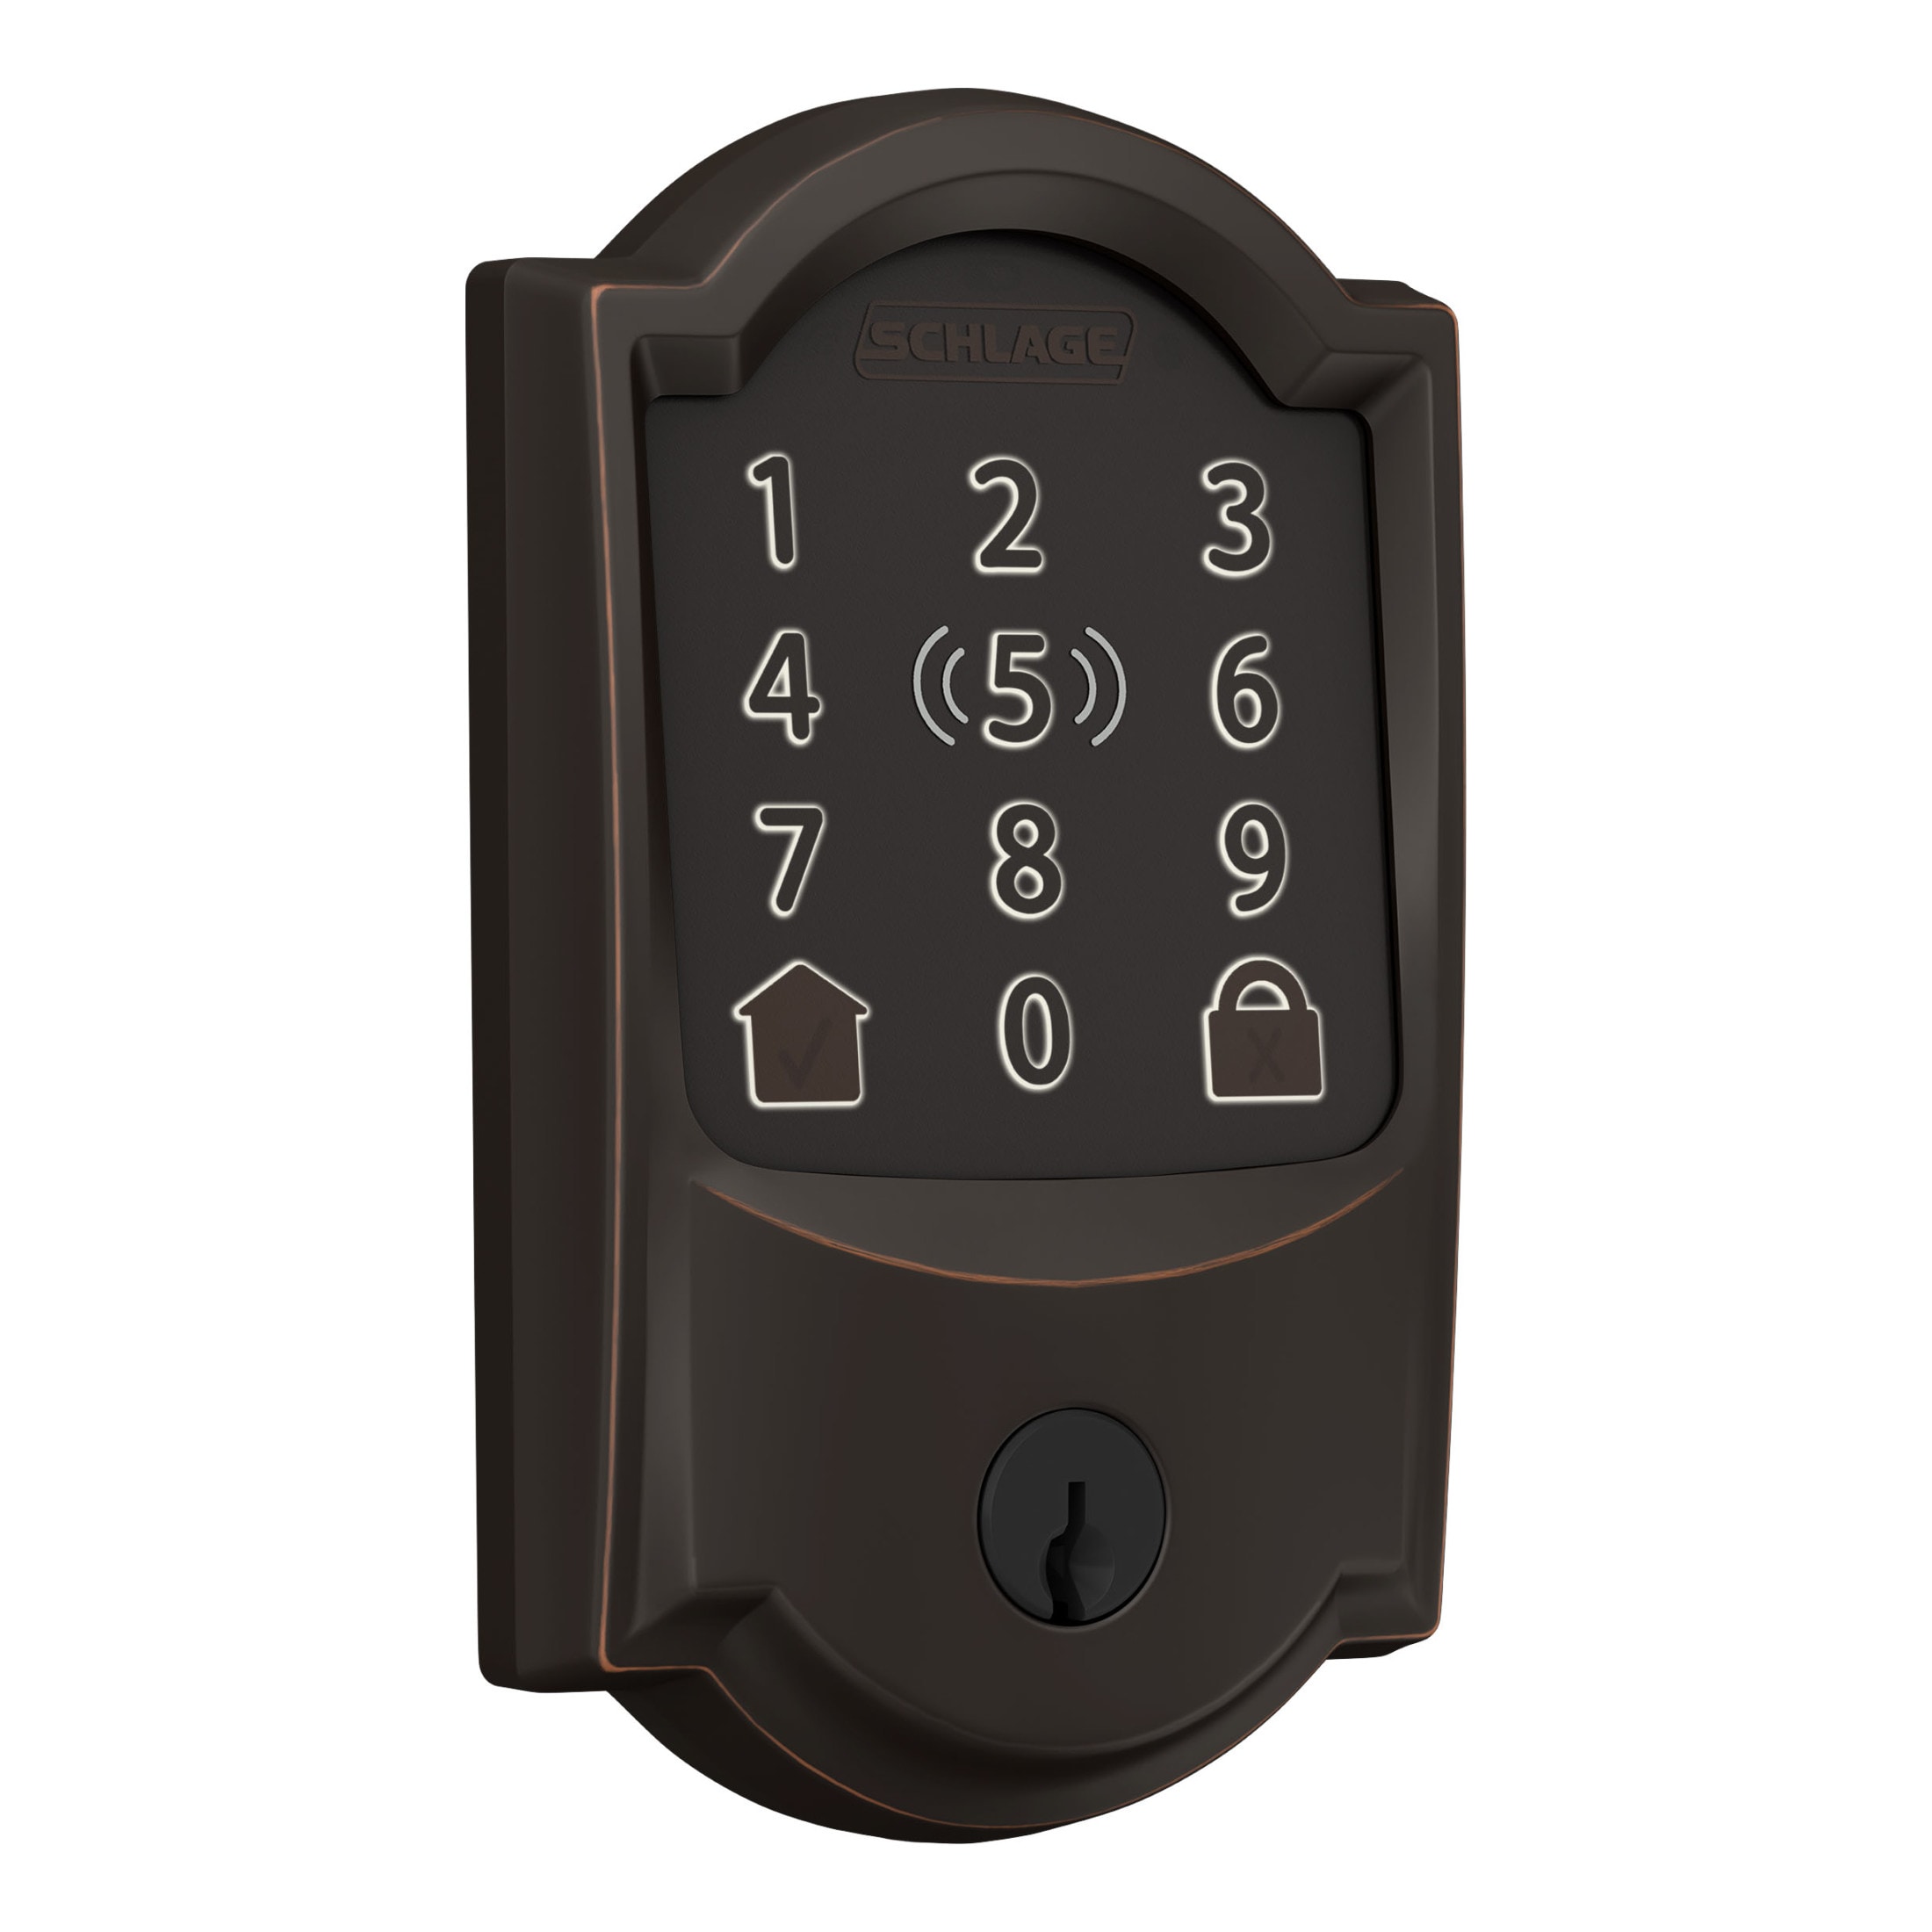 Schlage Encode Plus Camelot Aged Bronze Wifi Bluetooth Single Cylinder  Electronic Deadbolt Lighted Keypad Touchscreen Smart Lock at